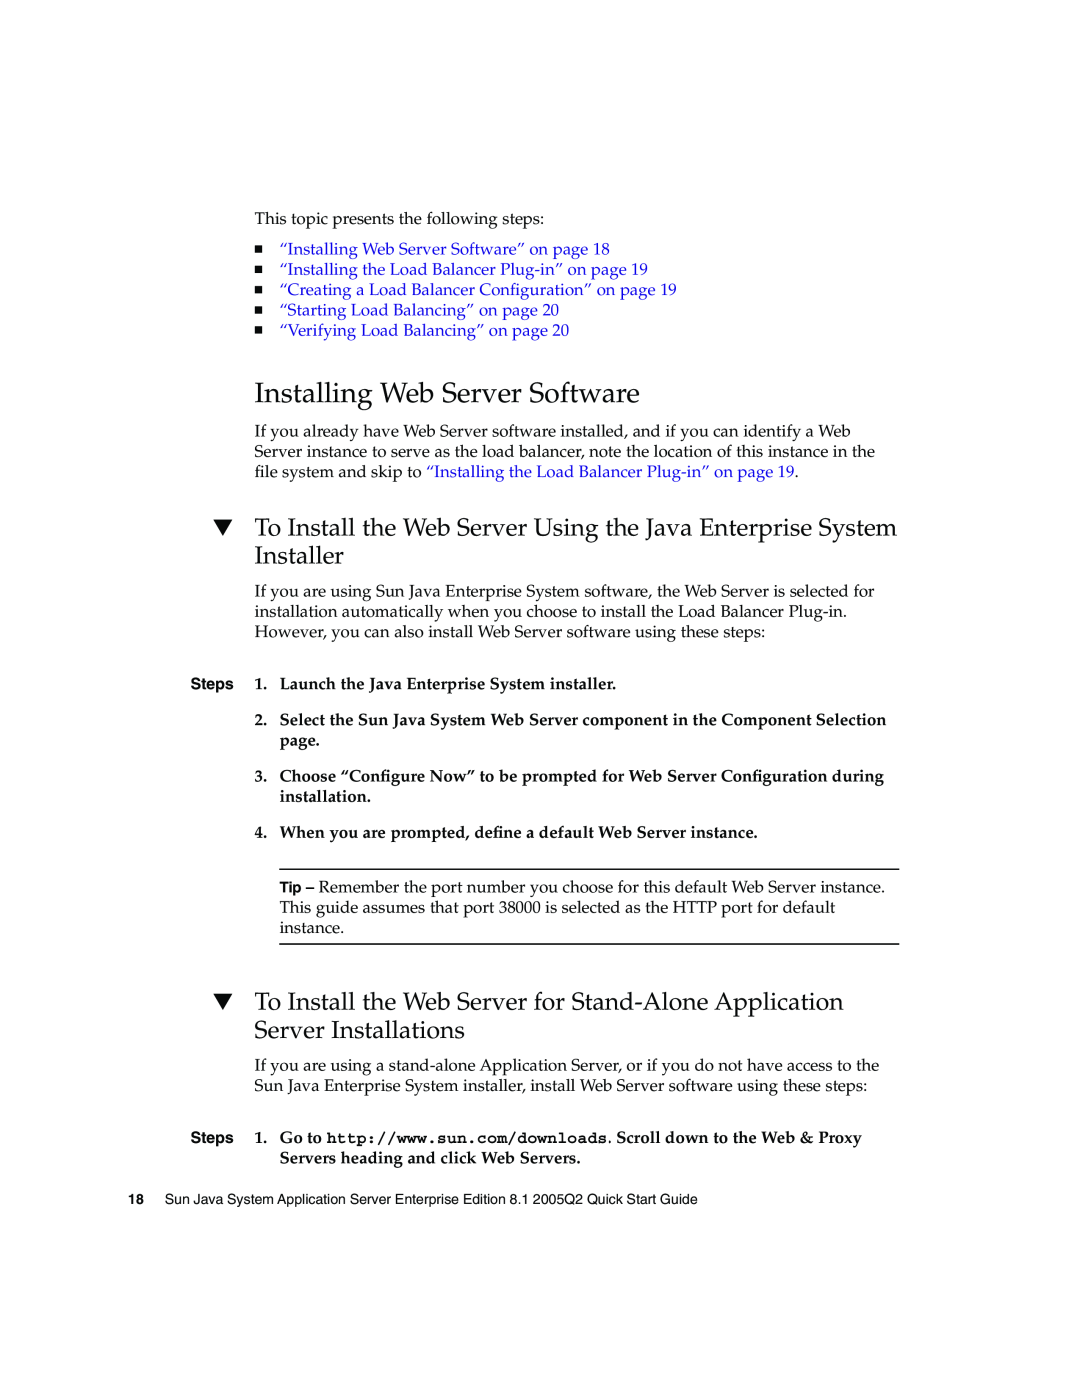 Sun Microsystems 2005Q2 “Installing Web Server Software” on page, “Installing the Load Balancer Plug-in” on page 